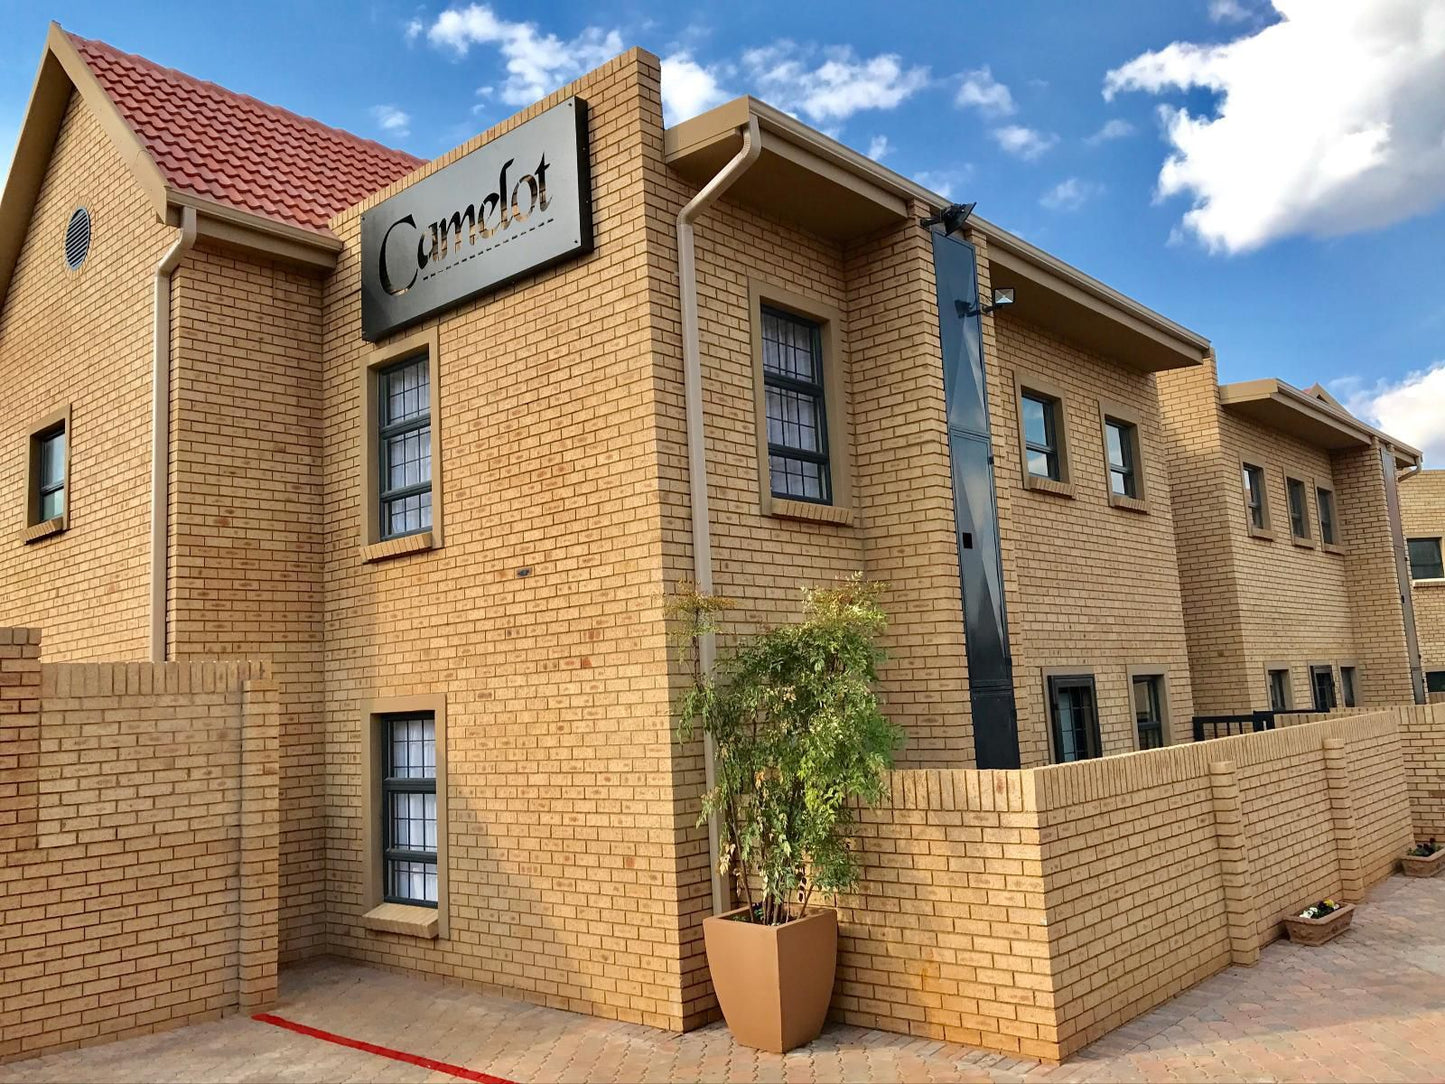 Camelot Guest House And Apartments Potchefstroom North West Province South Africa House, Building, Architecture, Brick Texture, Texture